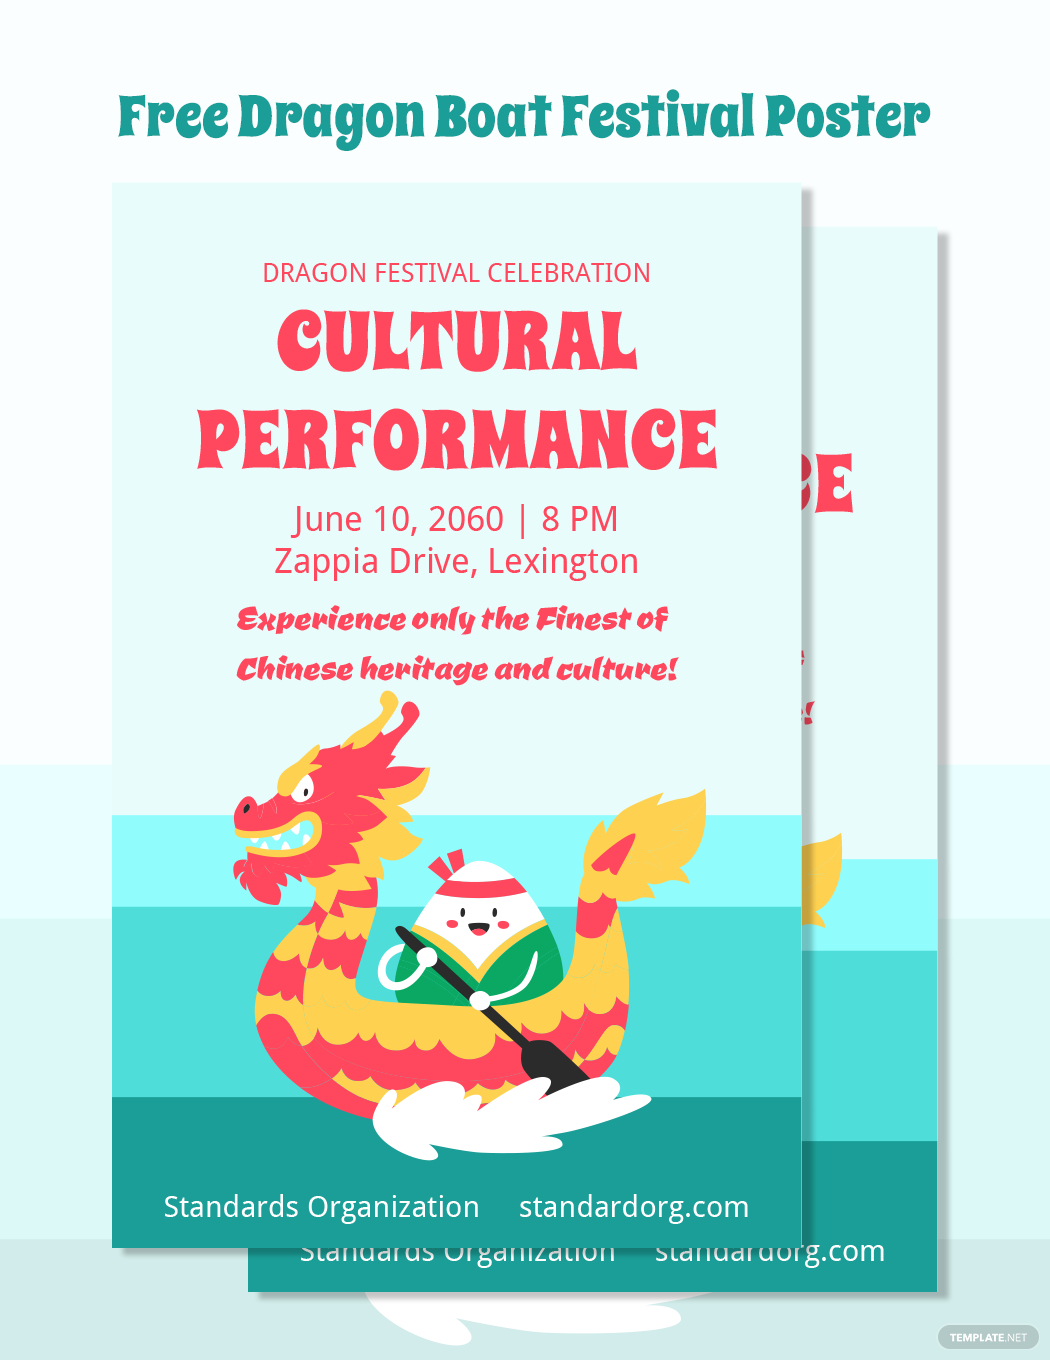 dragon boat festival poster ideas and examples